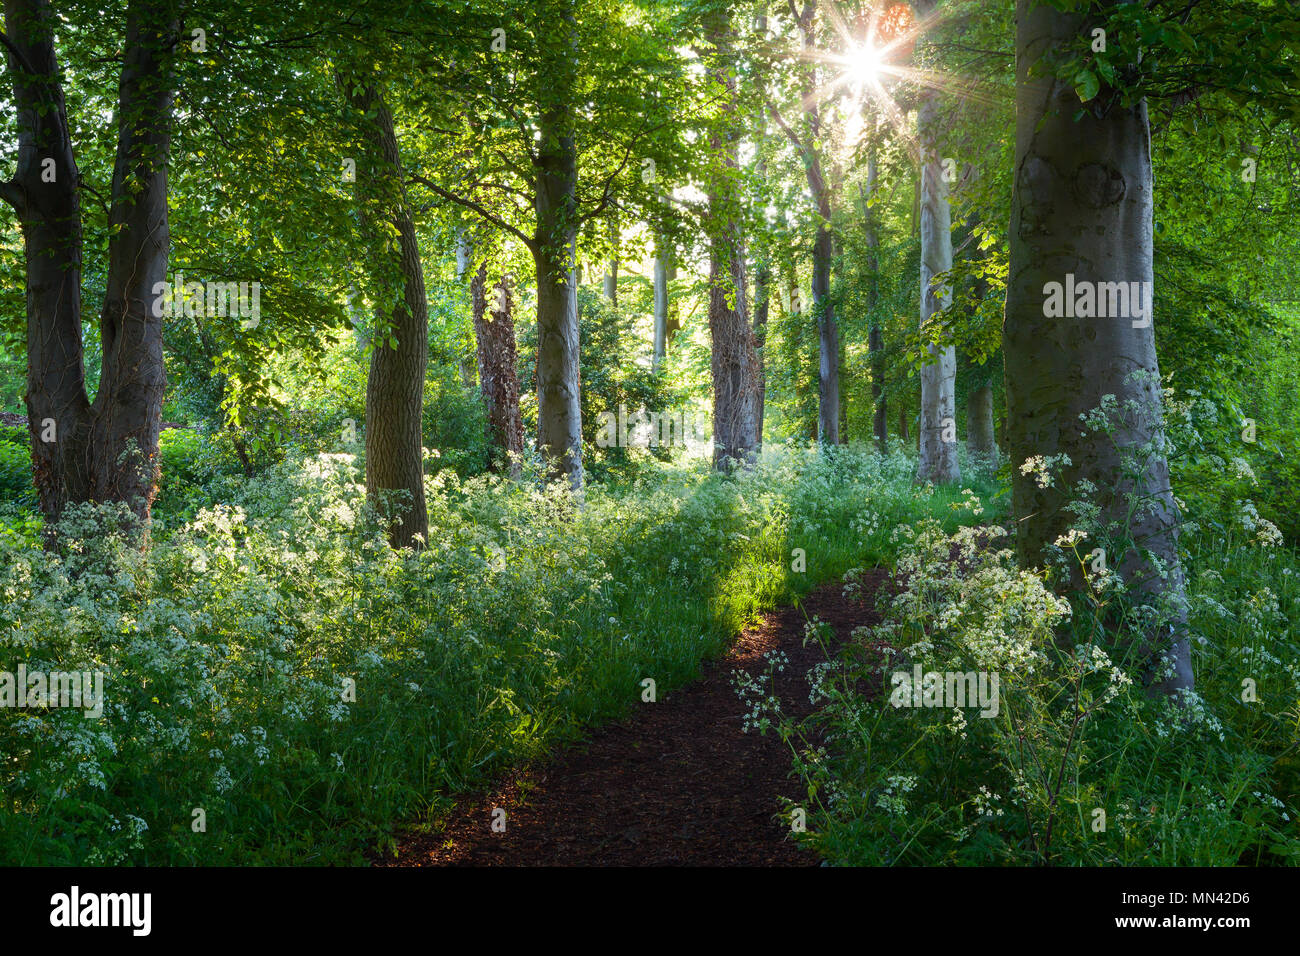 Barton-upon-Humber, North Lincolnshire, UK. 14th May, 2018. UK Weather: Early morning light on Cow Parsley and Beech Trees in Baysgarth Park in Spring. Barton-upon-Humber, North Lincolnshire, UK. 14th May 2018. Credit: LEE BEEL/Alamy Live News Stock Photo